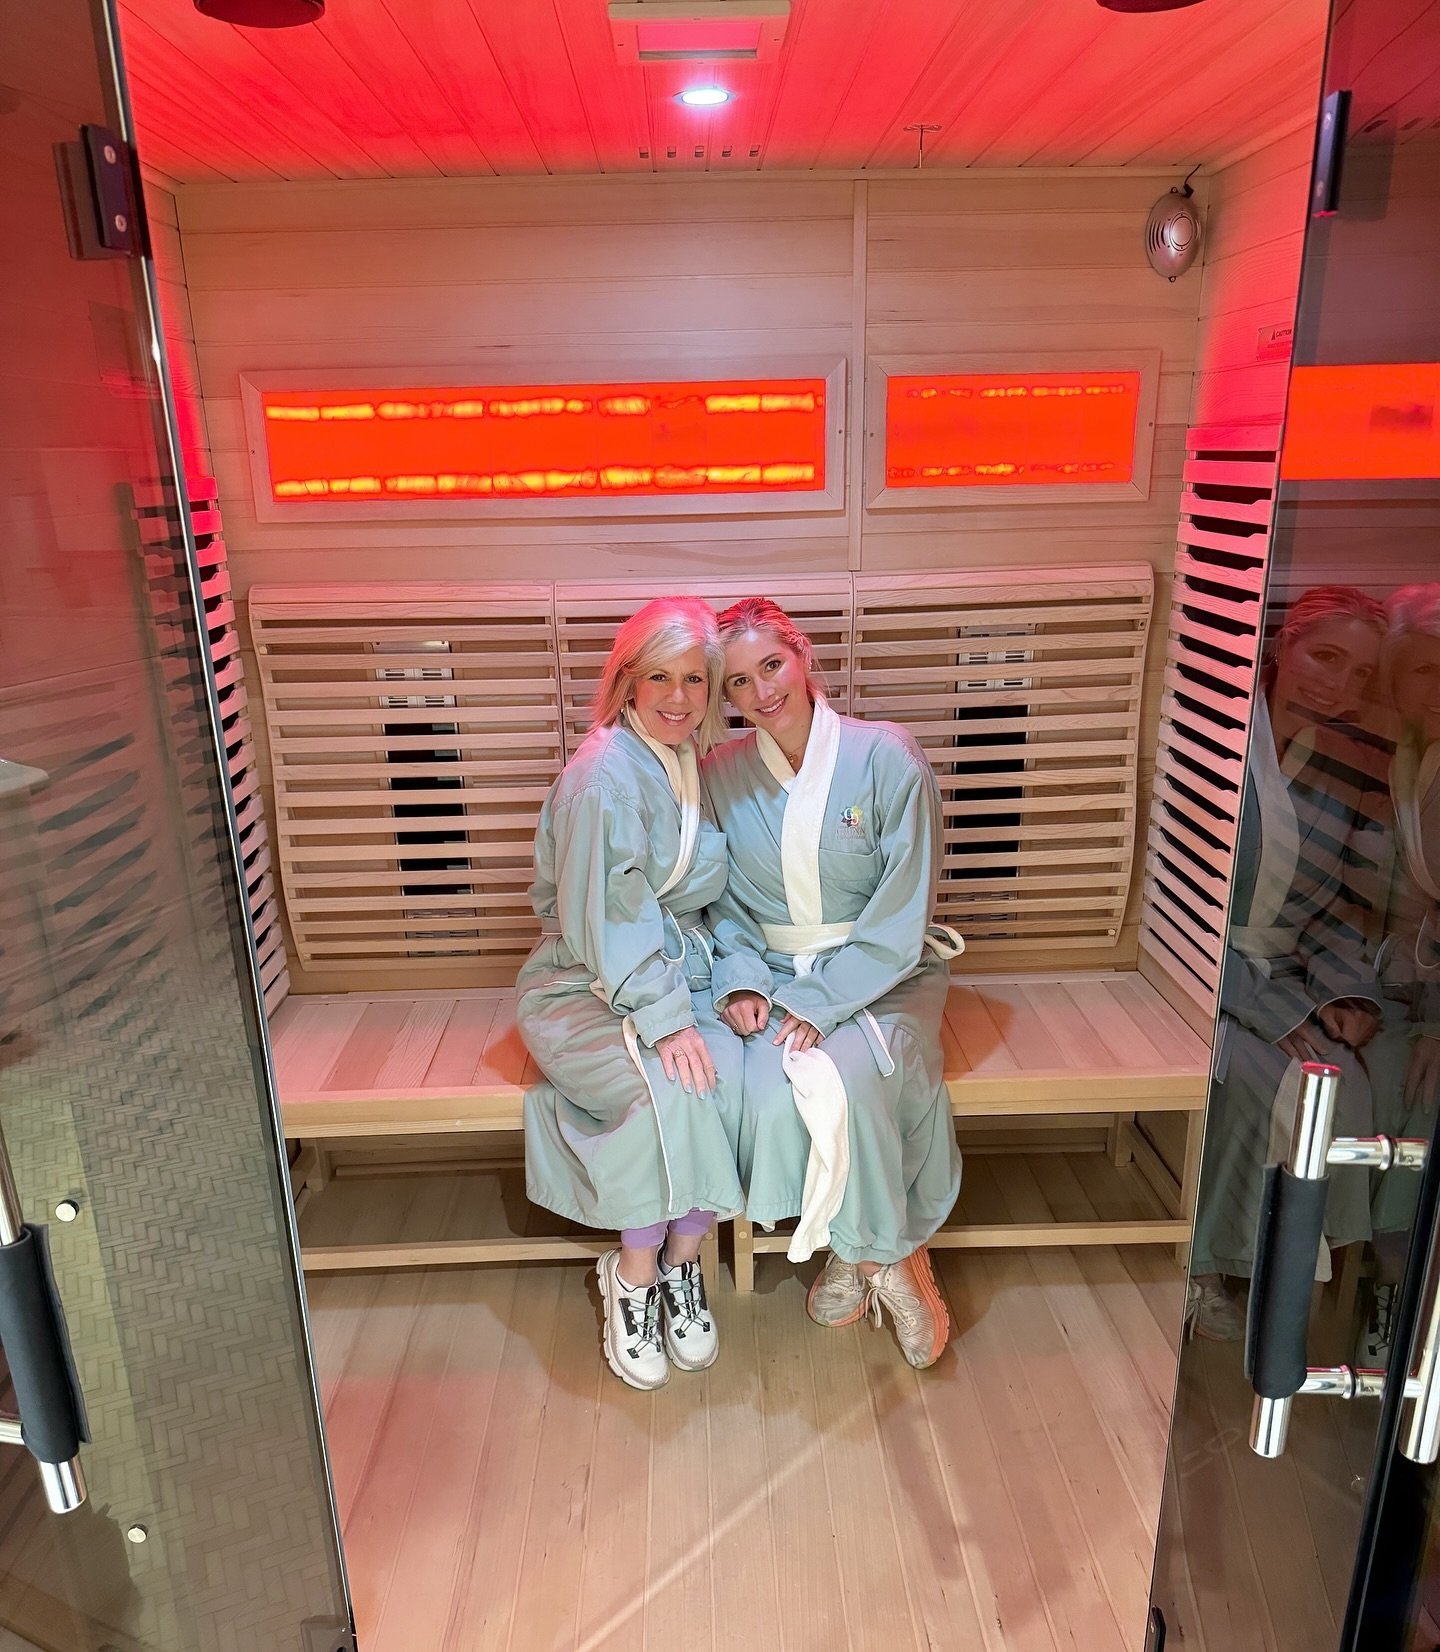 A Mother/Daughter Infrared Sauna Session has got to be one of the best Mother&rsquo;s Day Gifts! 🔥❤️😍

Stop by tomorrow to shop! All treatments and products will be 20% OFF! 
*ellacor &amp; resurfacing excluded 

Come see us from 9am-12pm at our @l